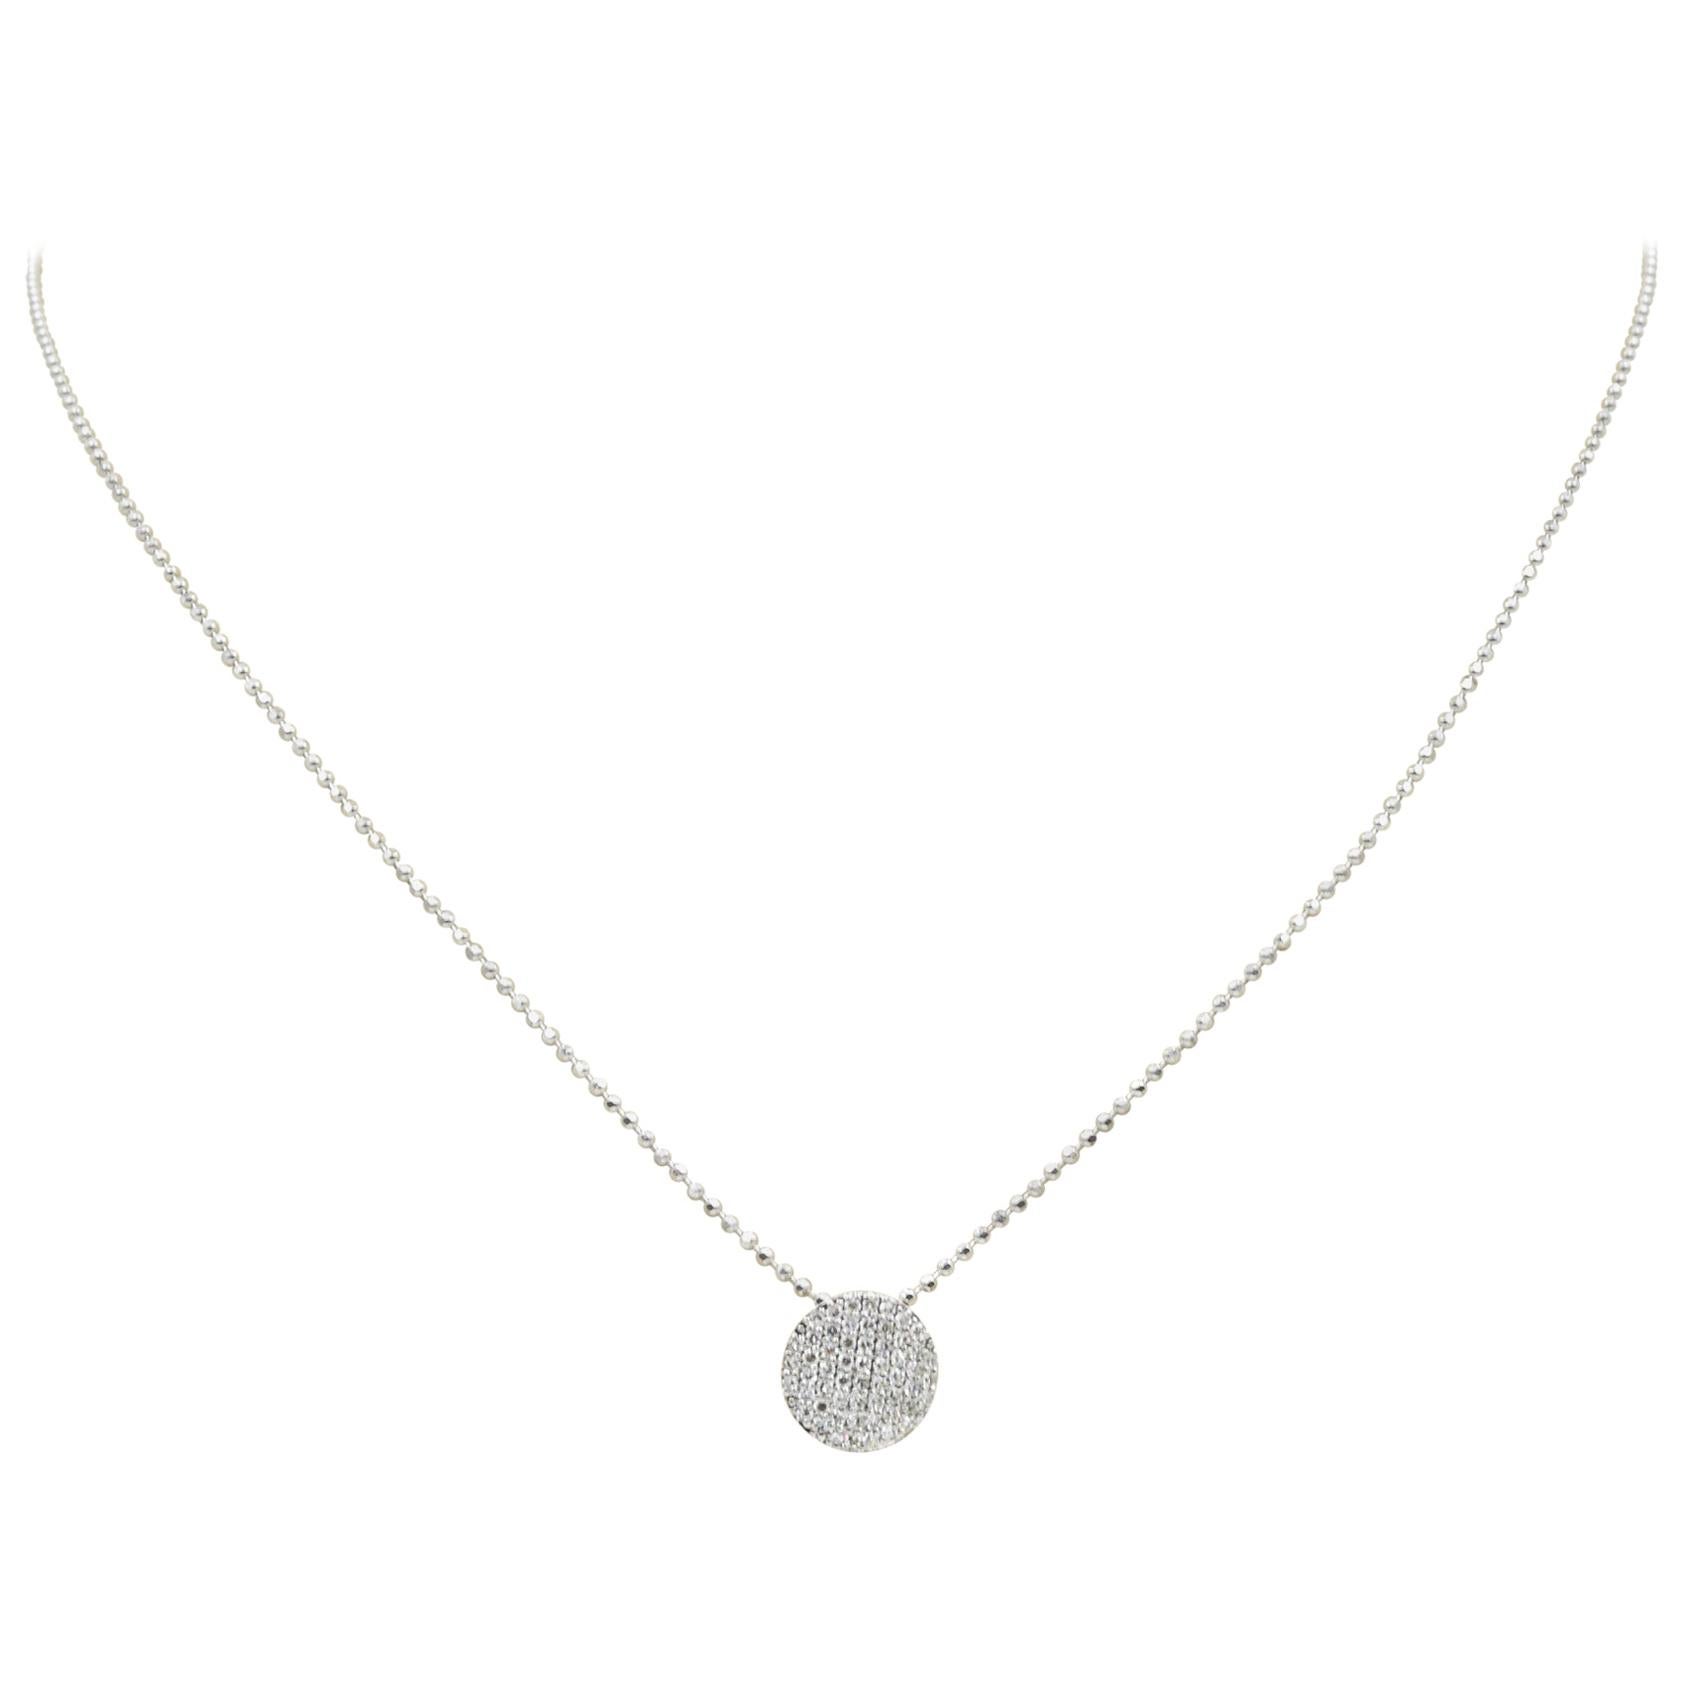 Phillips House Mini Infinity Necklace N20013PDW 0.27 Carat Diamonds For Sale